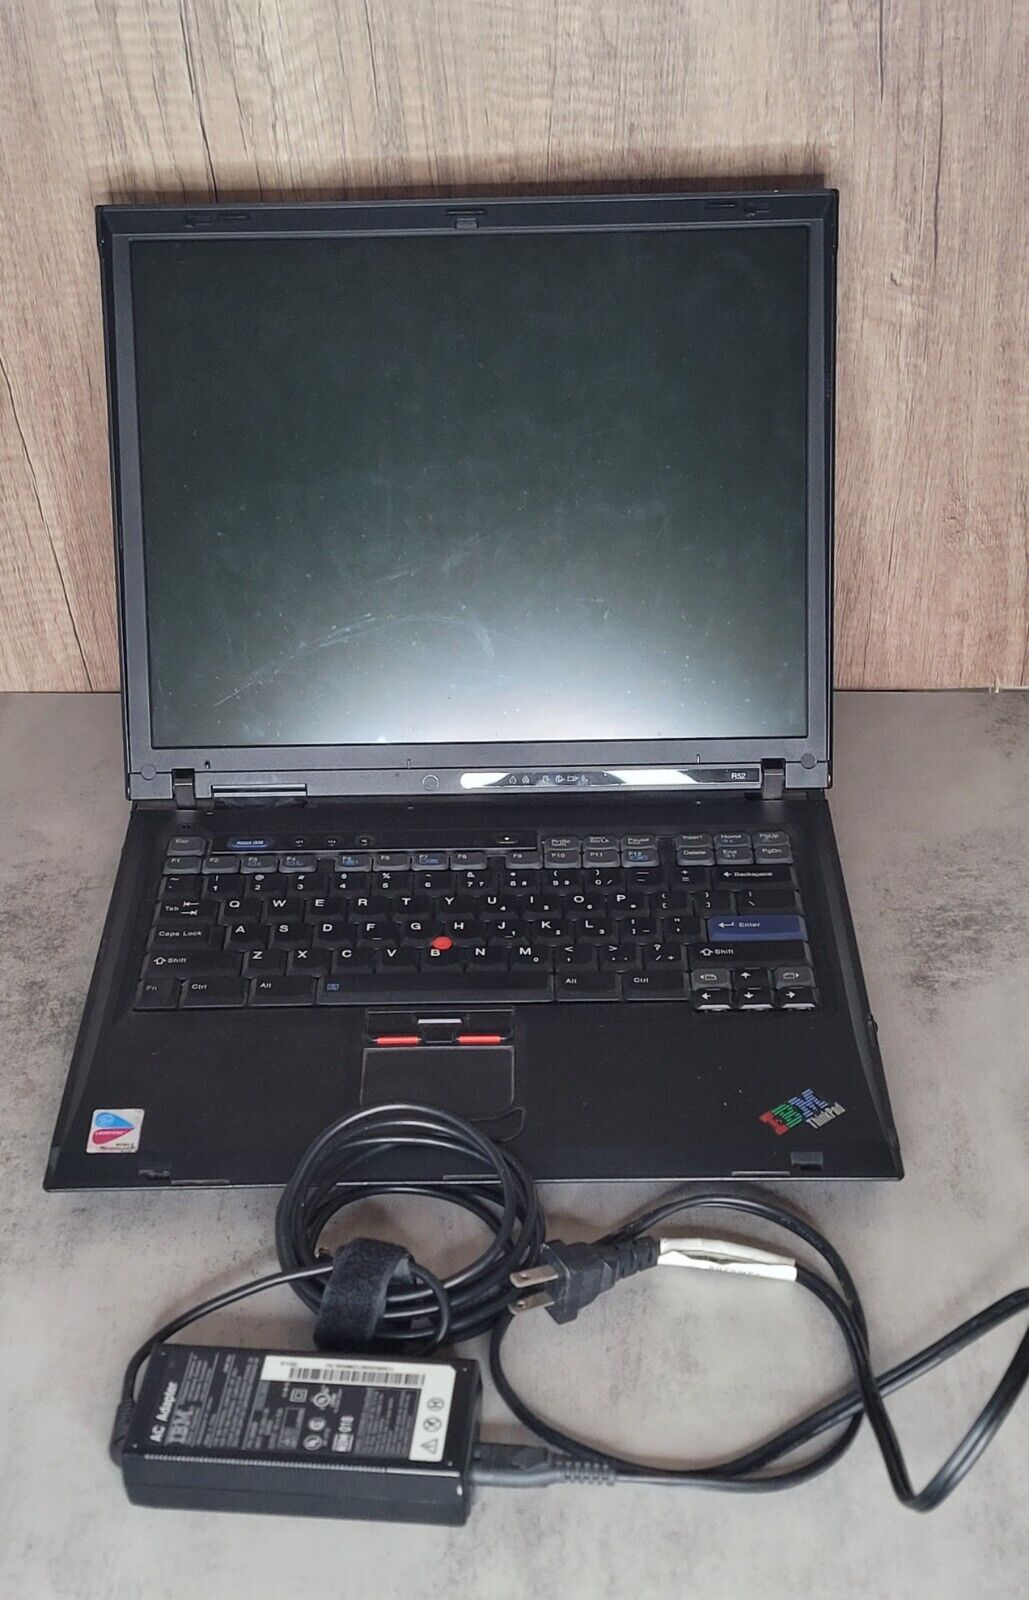 VTG IBM ThinkPad 1847 Windows XP Professional with AC Adapter AS IS PARTS READ